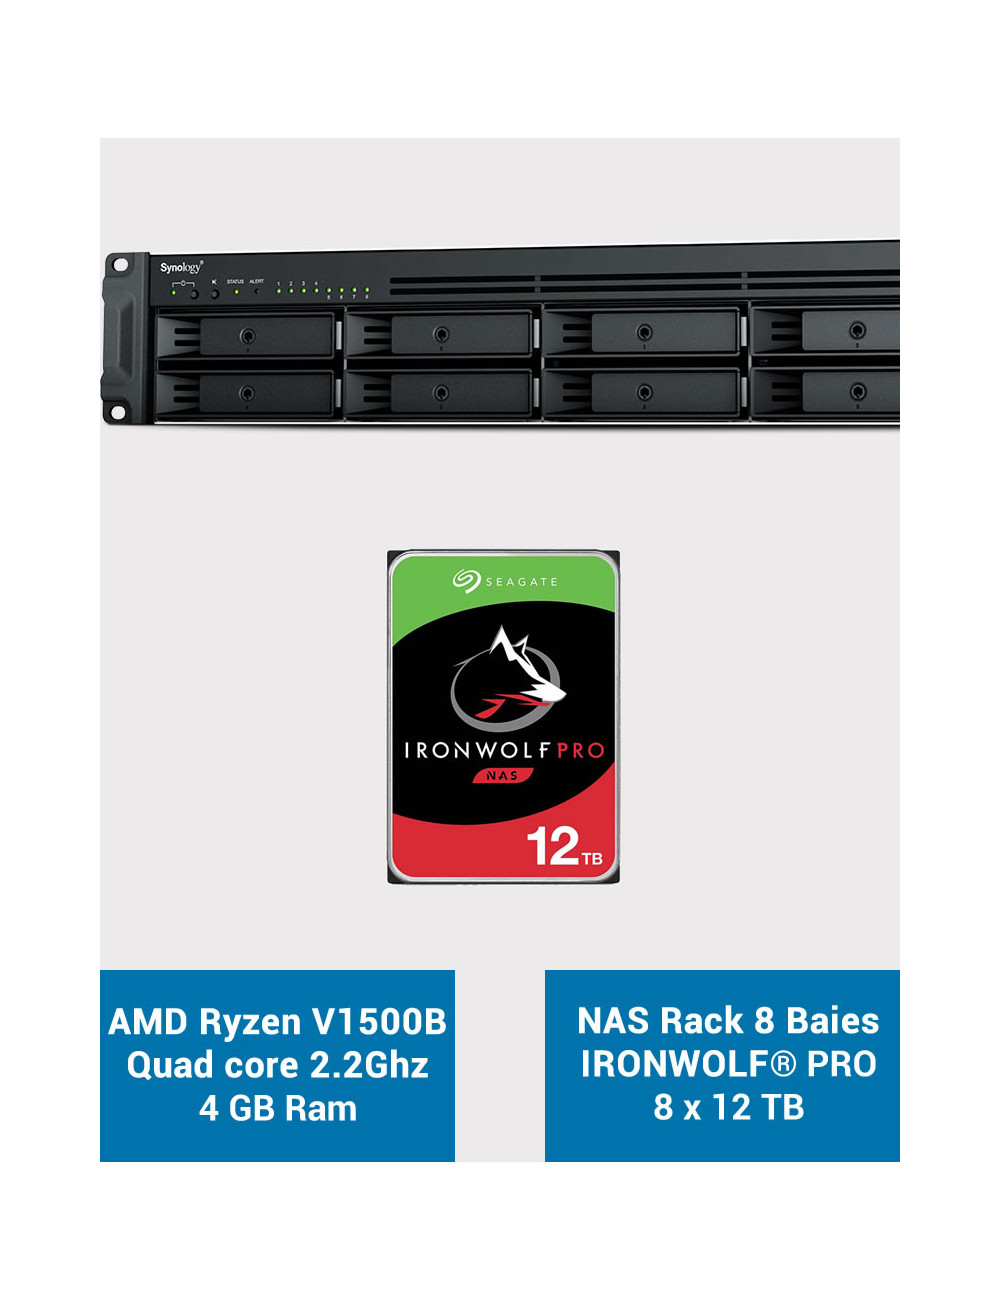 Synology RS1221+ Serveur NAS Rack IRONWOLF PRO 96To (8x12To)